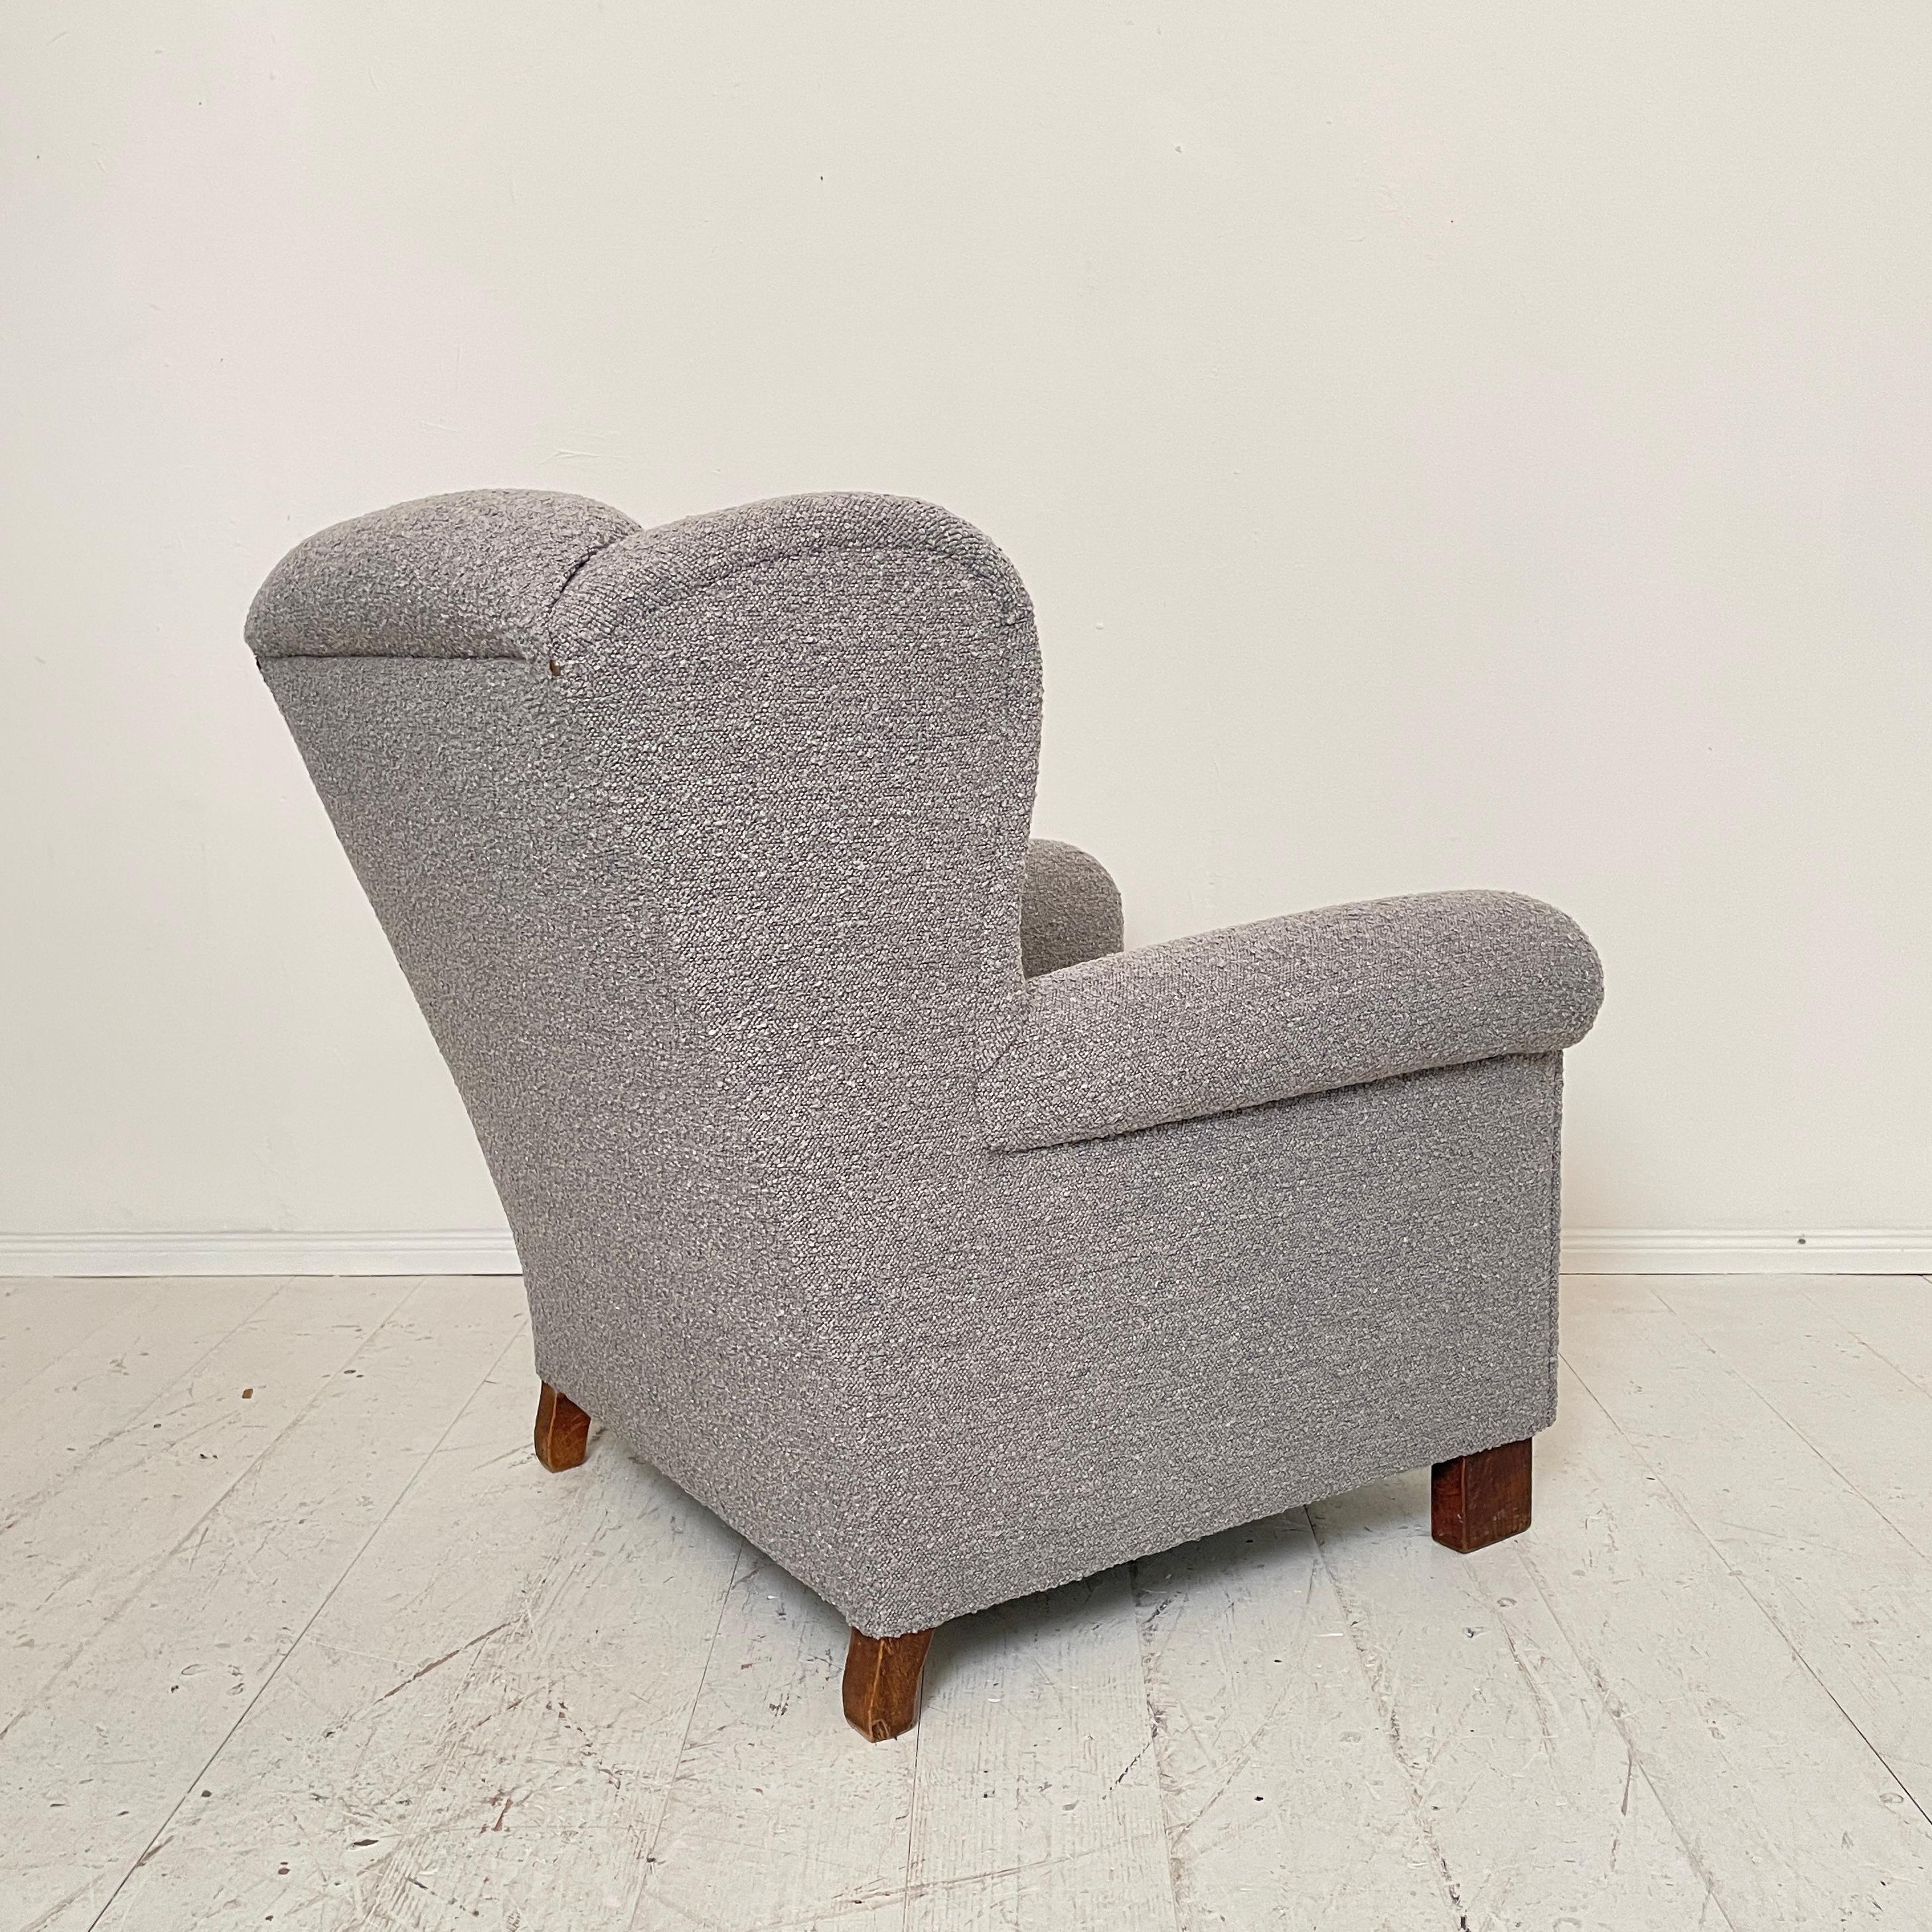 German Art Deco Wingback Chair in Gray Boucle Fabric, 1925 For Sale 1